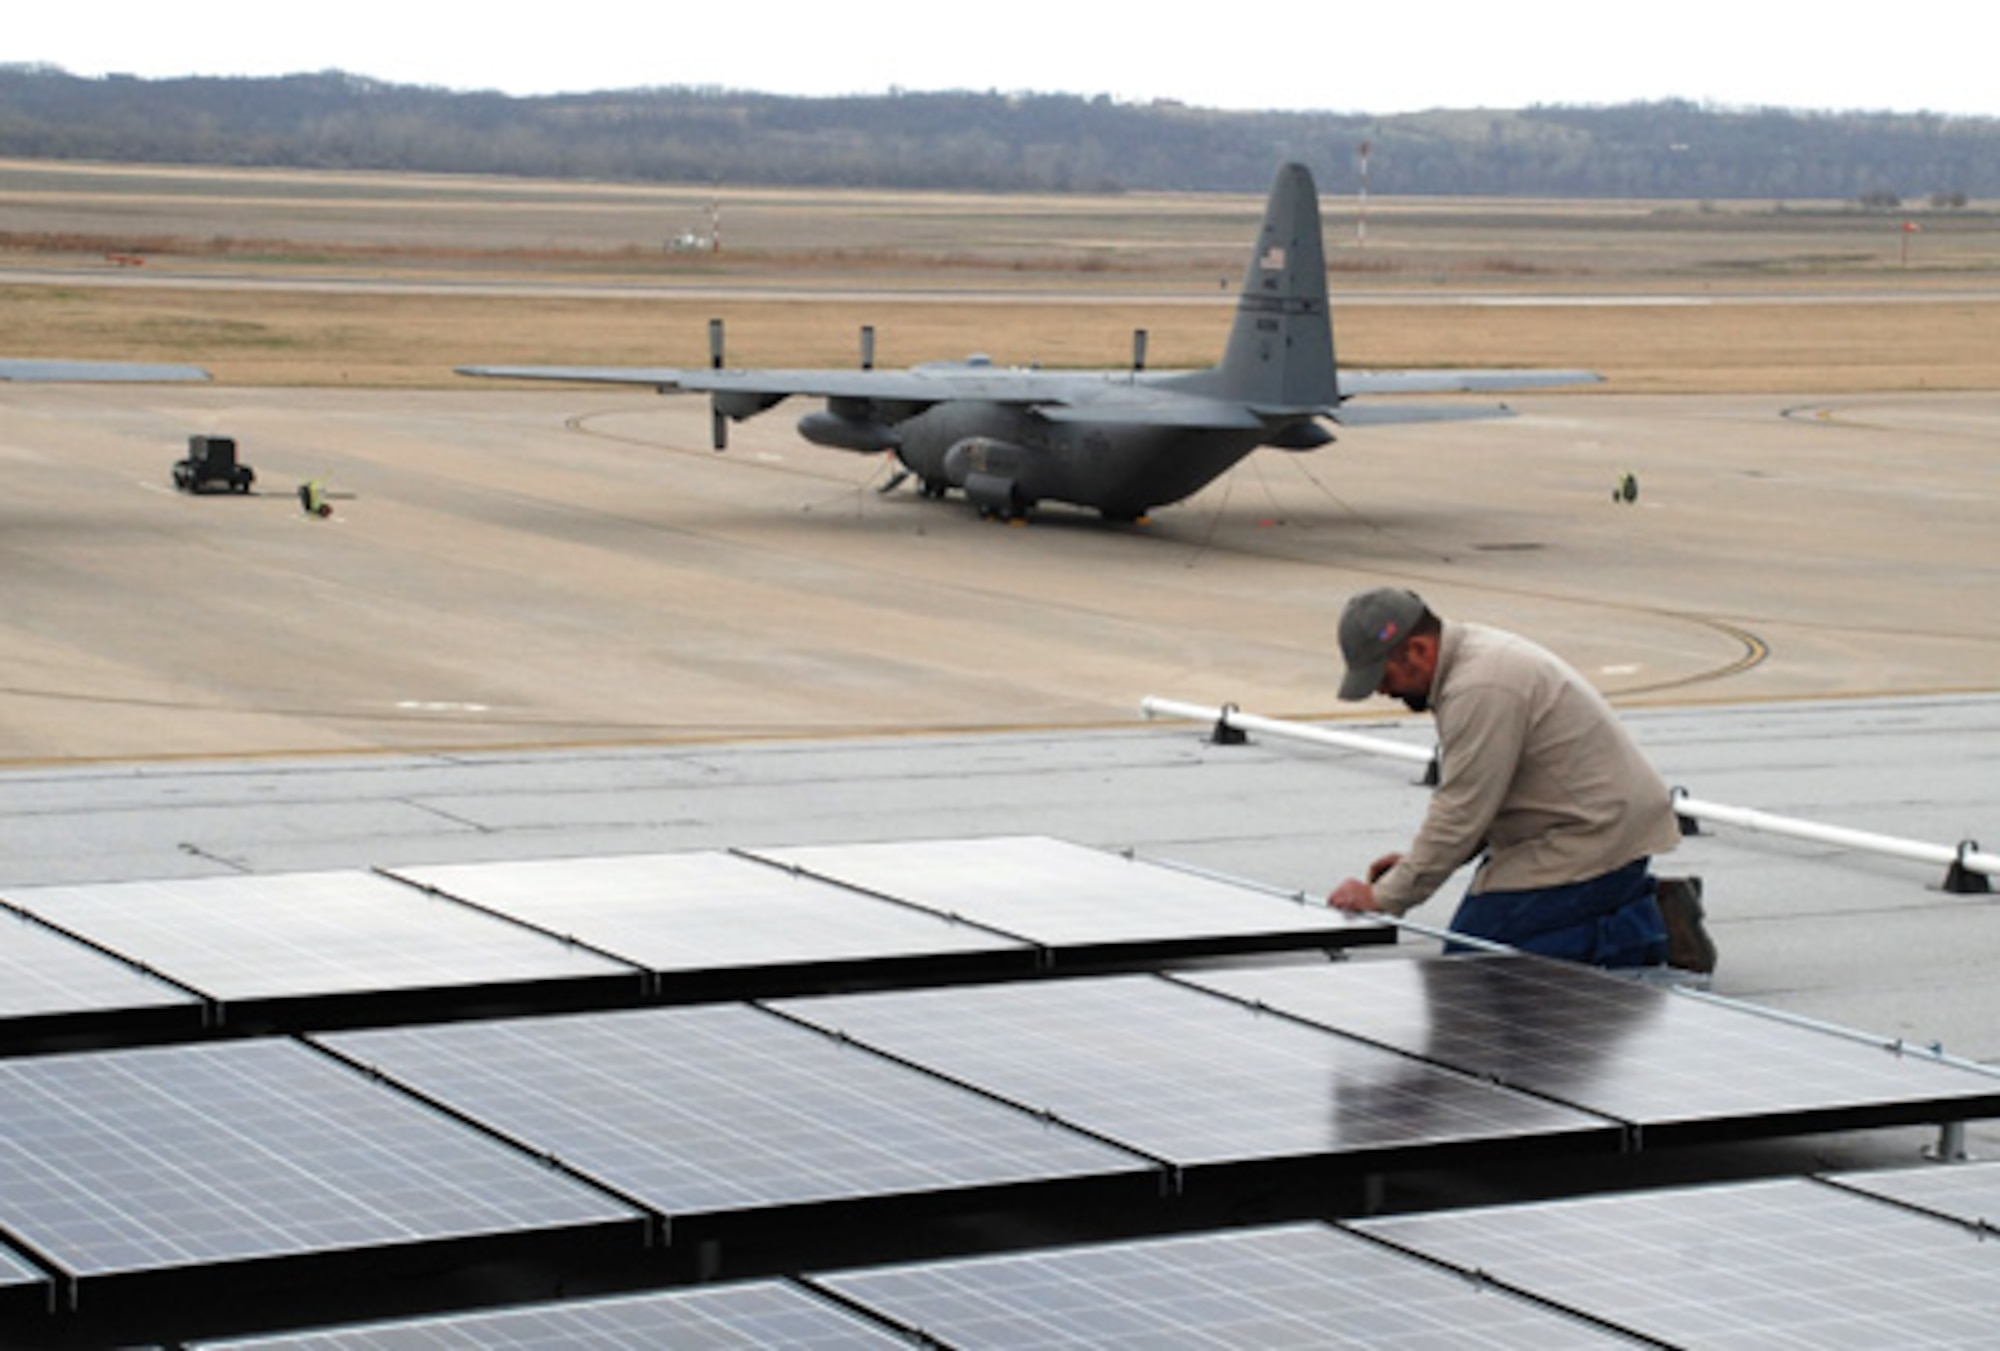 Solar panels are installed on a hanger at the 139th Airlift Wing hanger at Rosecrans airport in St. Joseph Missouri on March 29, 2009. (U.S. Air Force photo by Maj. Barb Denny) (RELEASED)